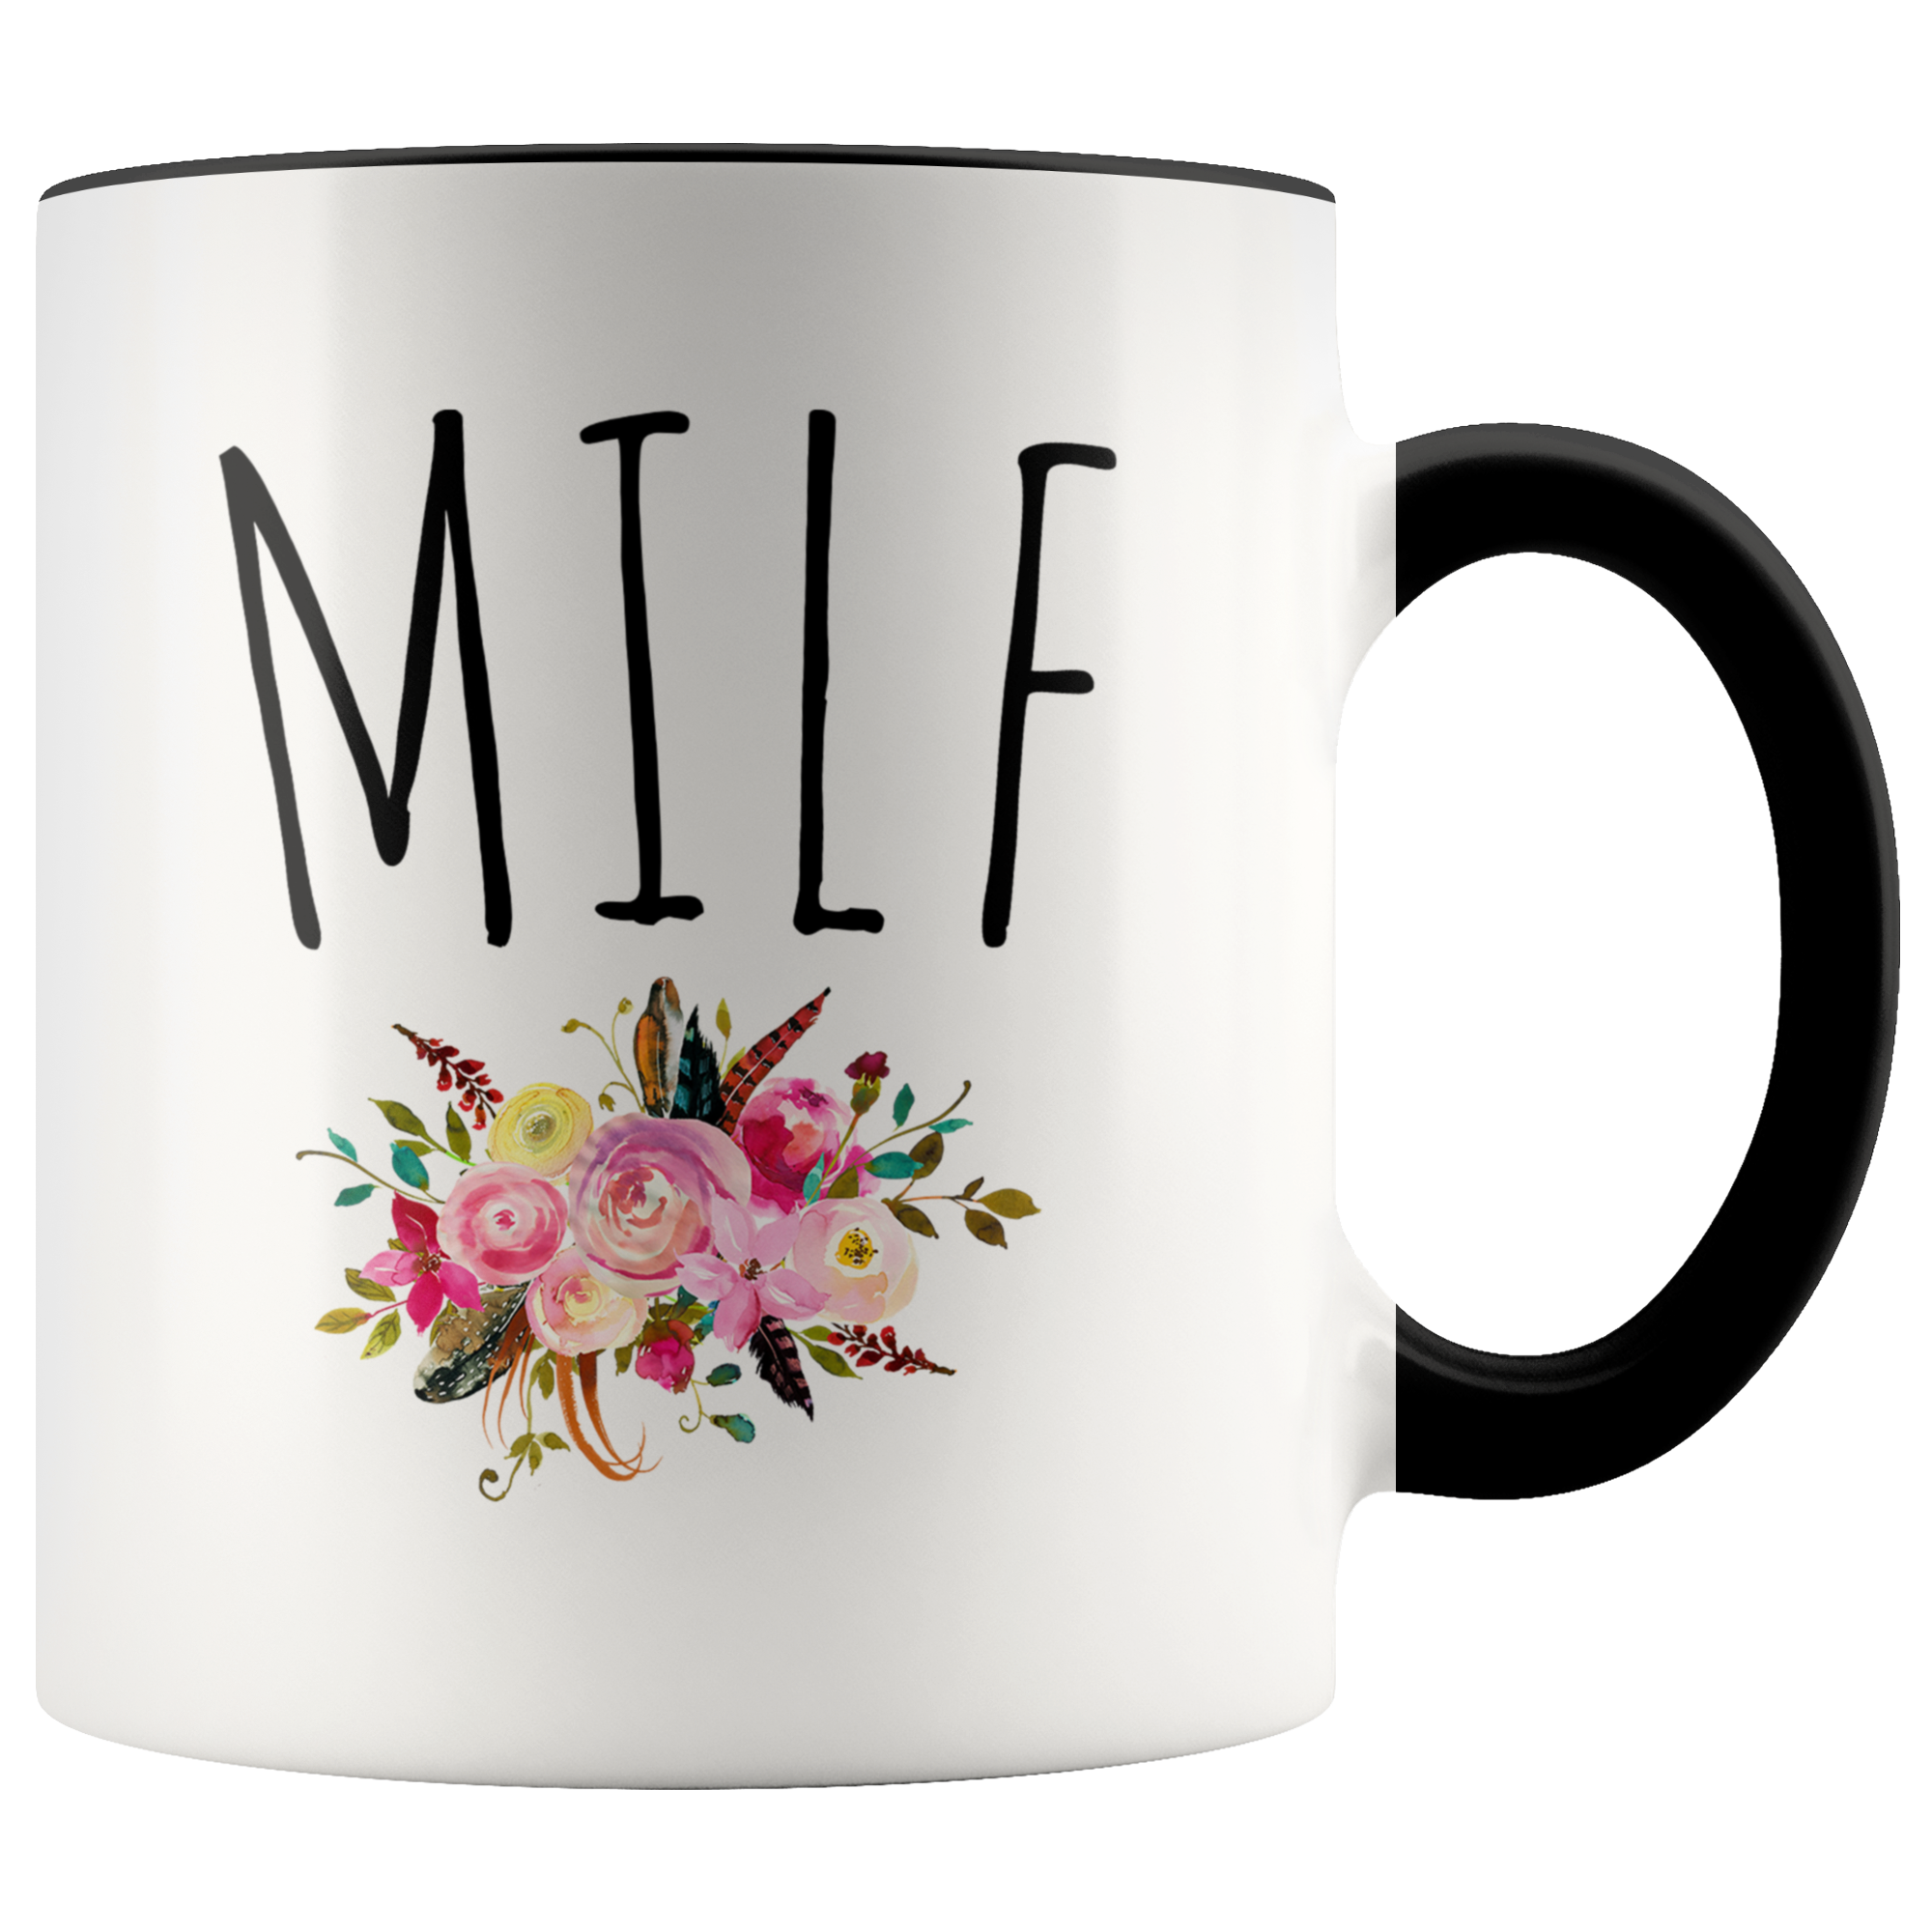 MILF Mug Mom Gag Gift Funny Wife Gifts for Mother's Day Floral Coffee Cup